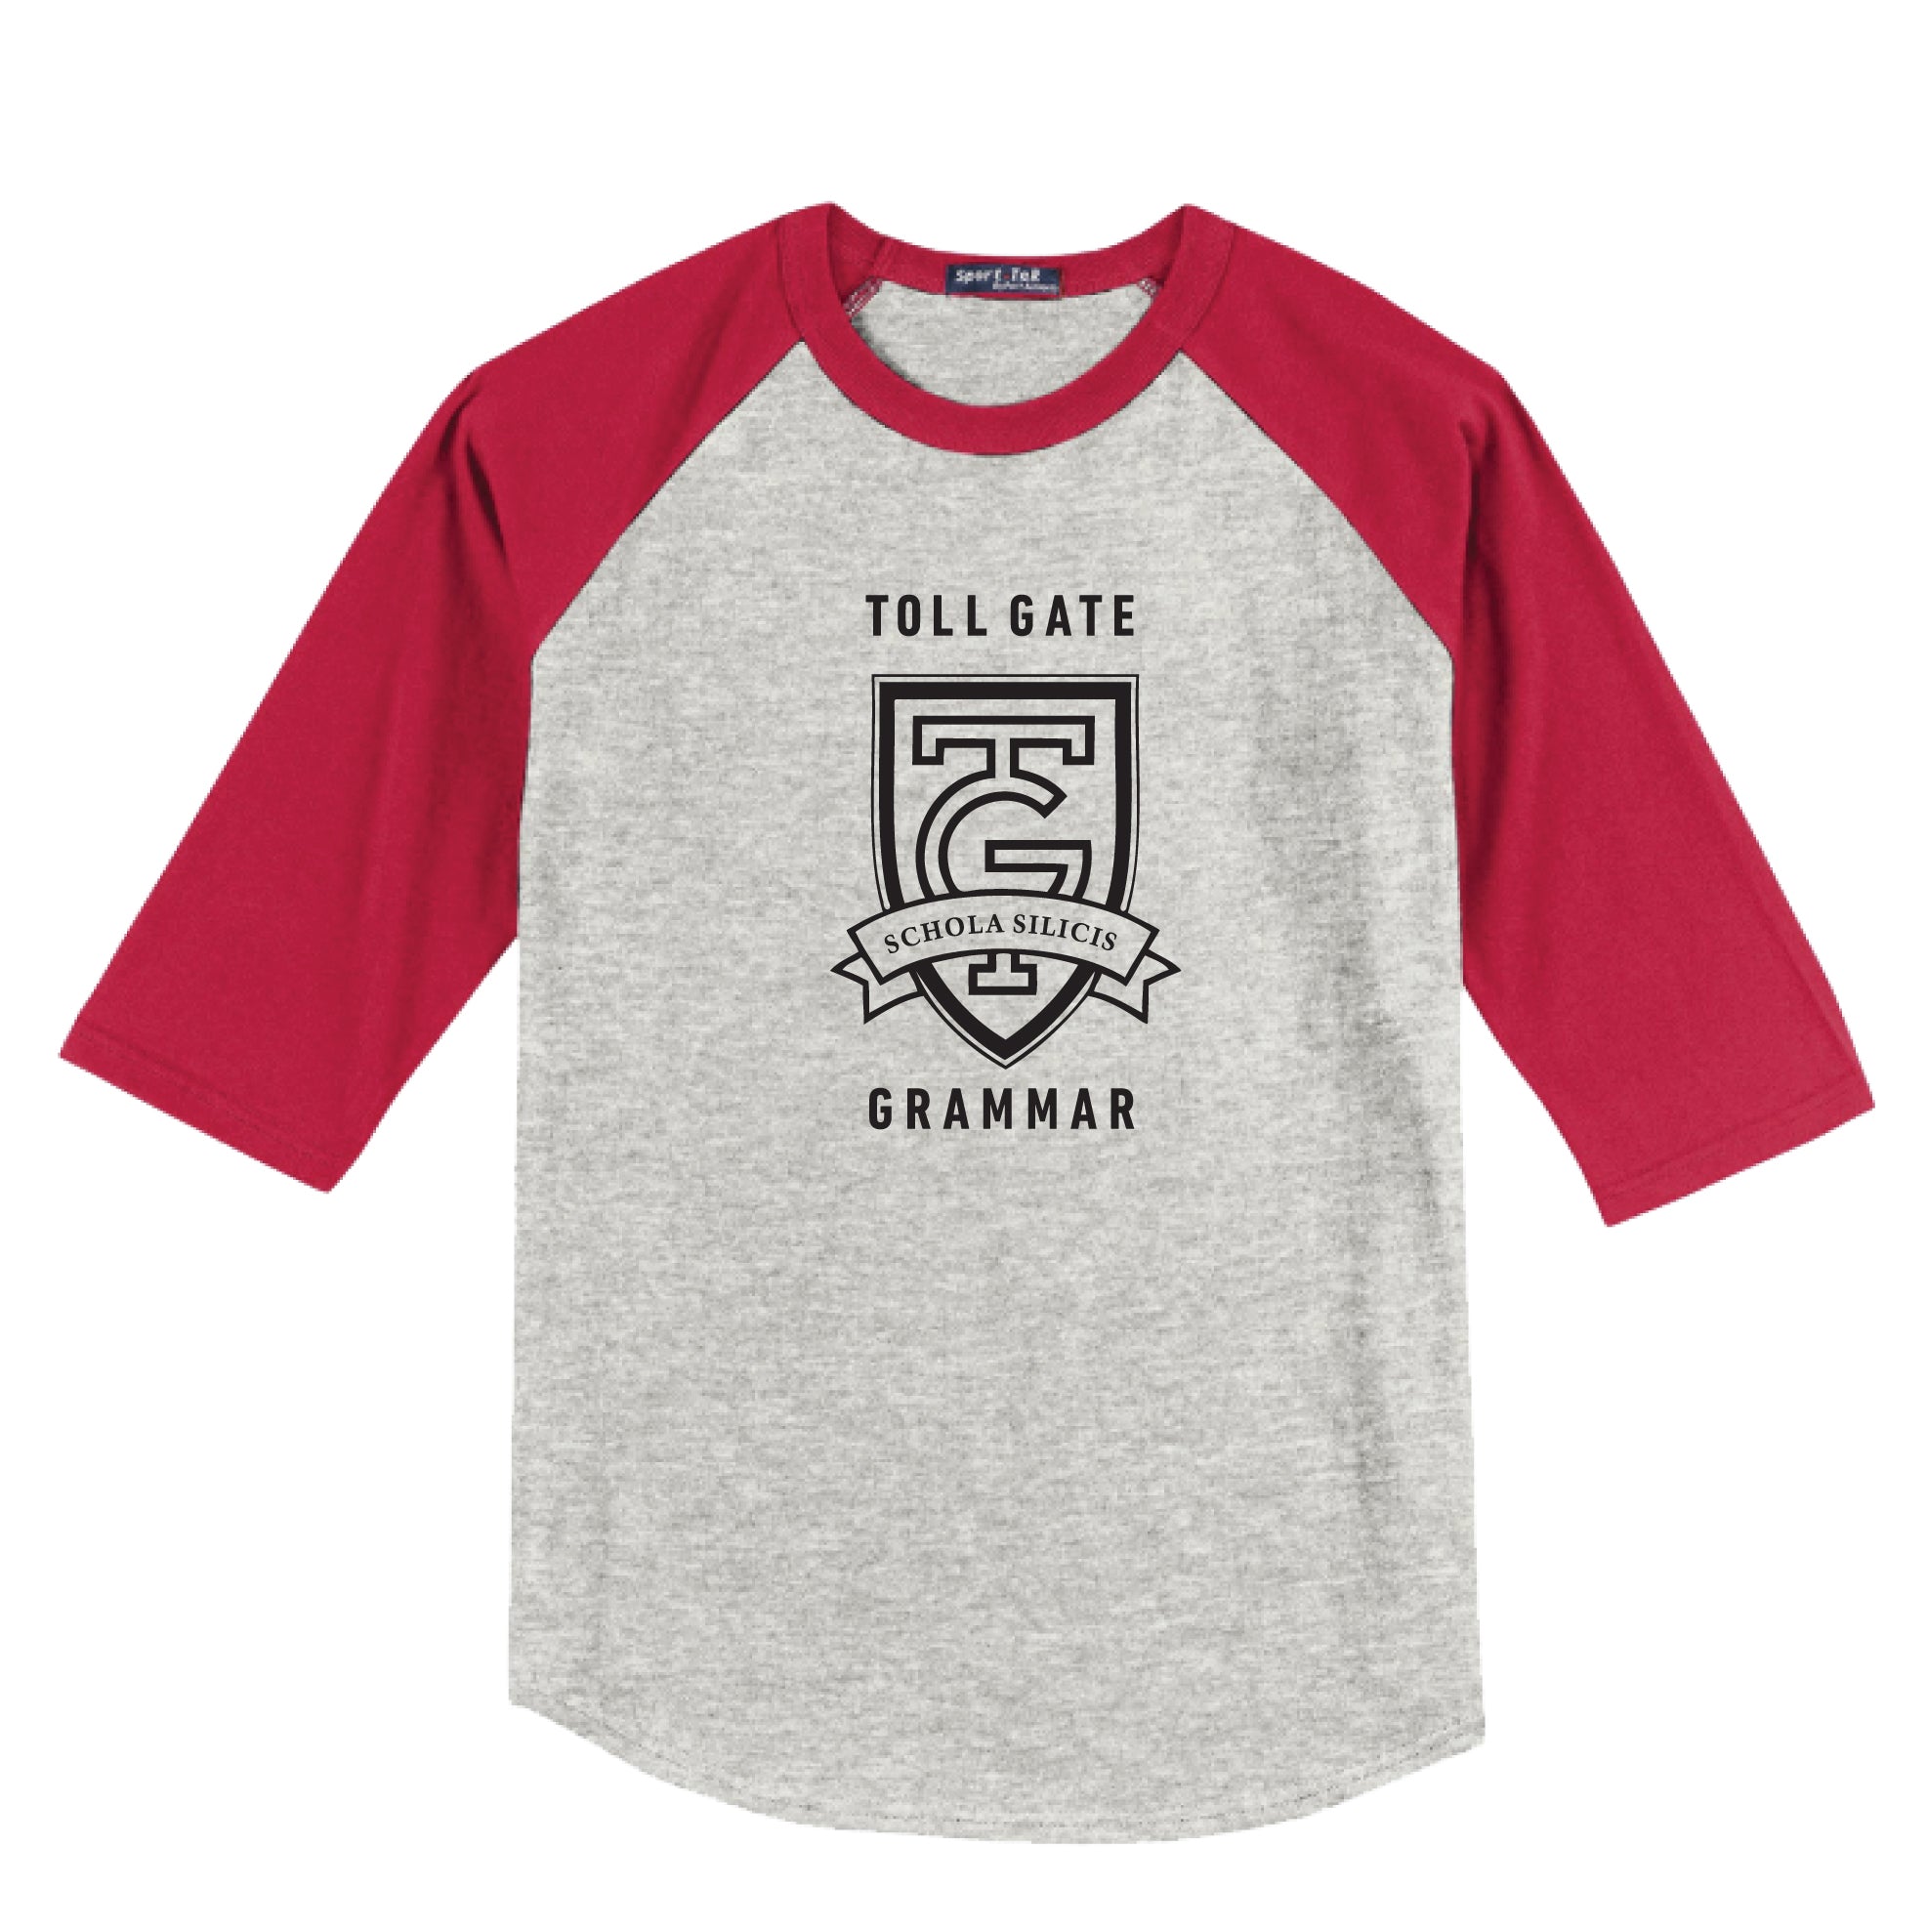 Toll Gate Red Sleeved Raglan Jersey - Adult Unisex and Youth